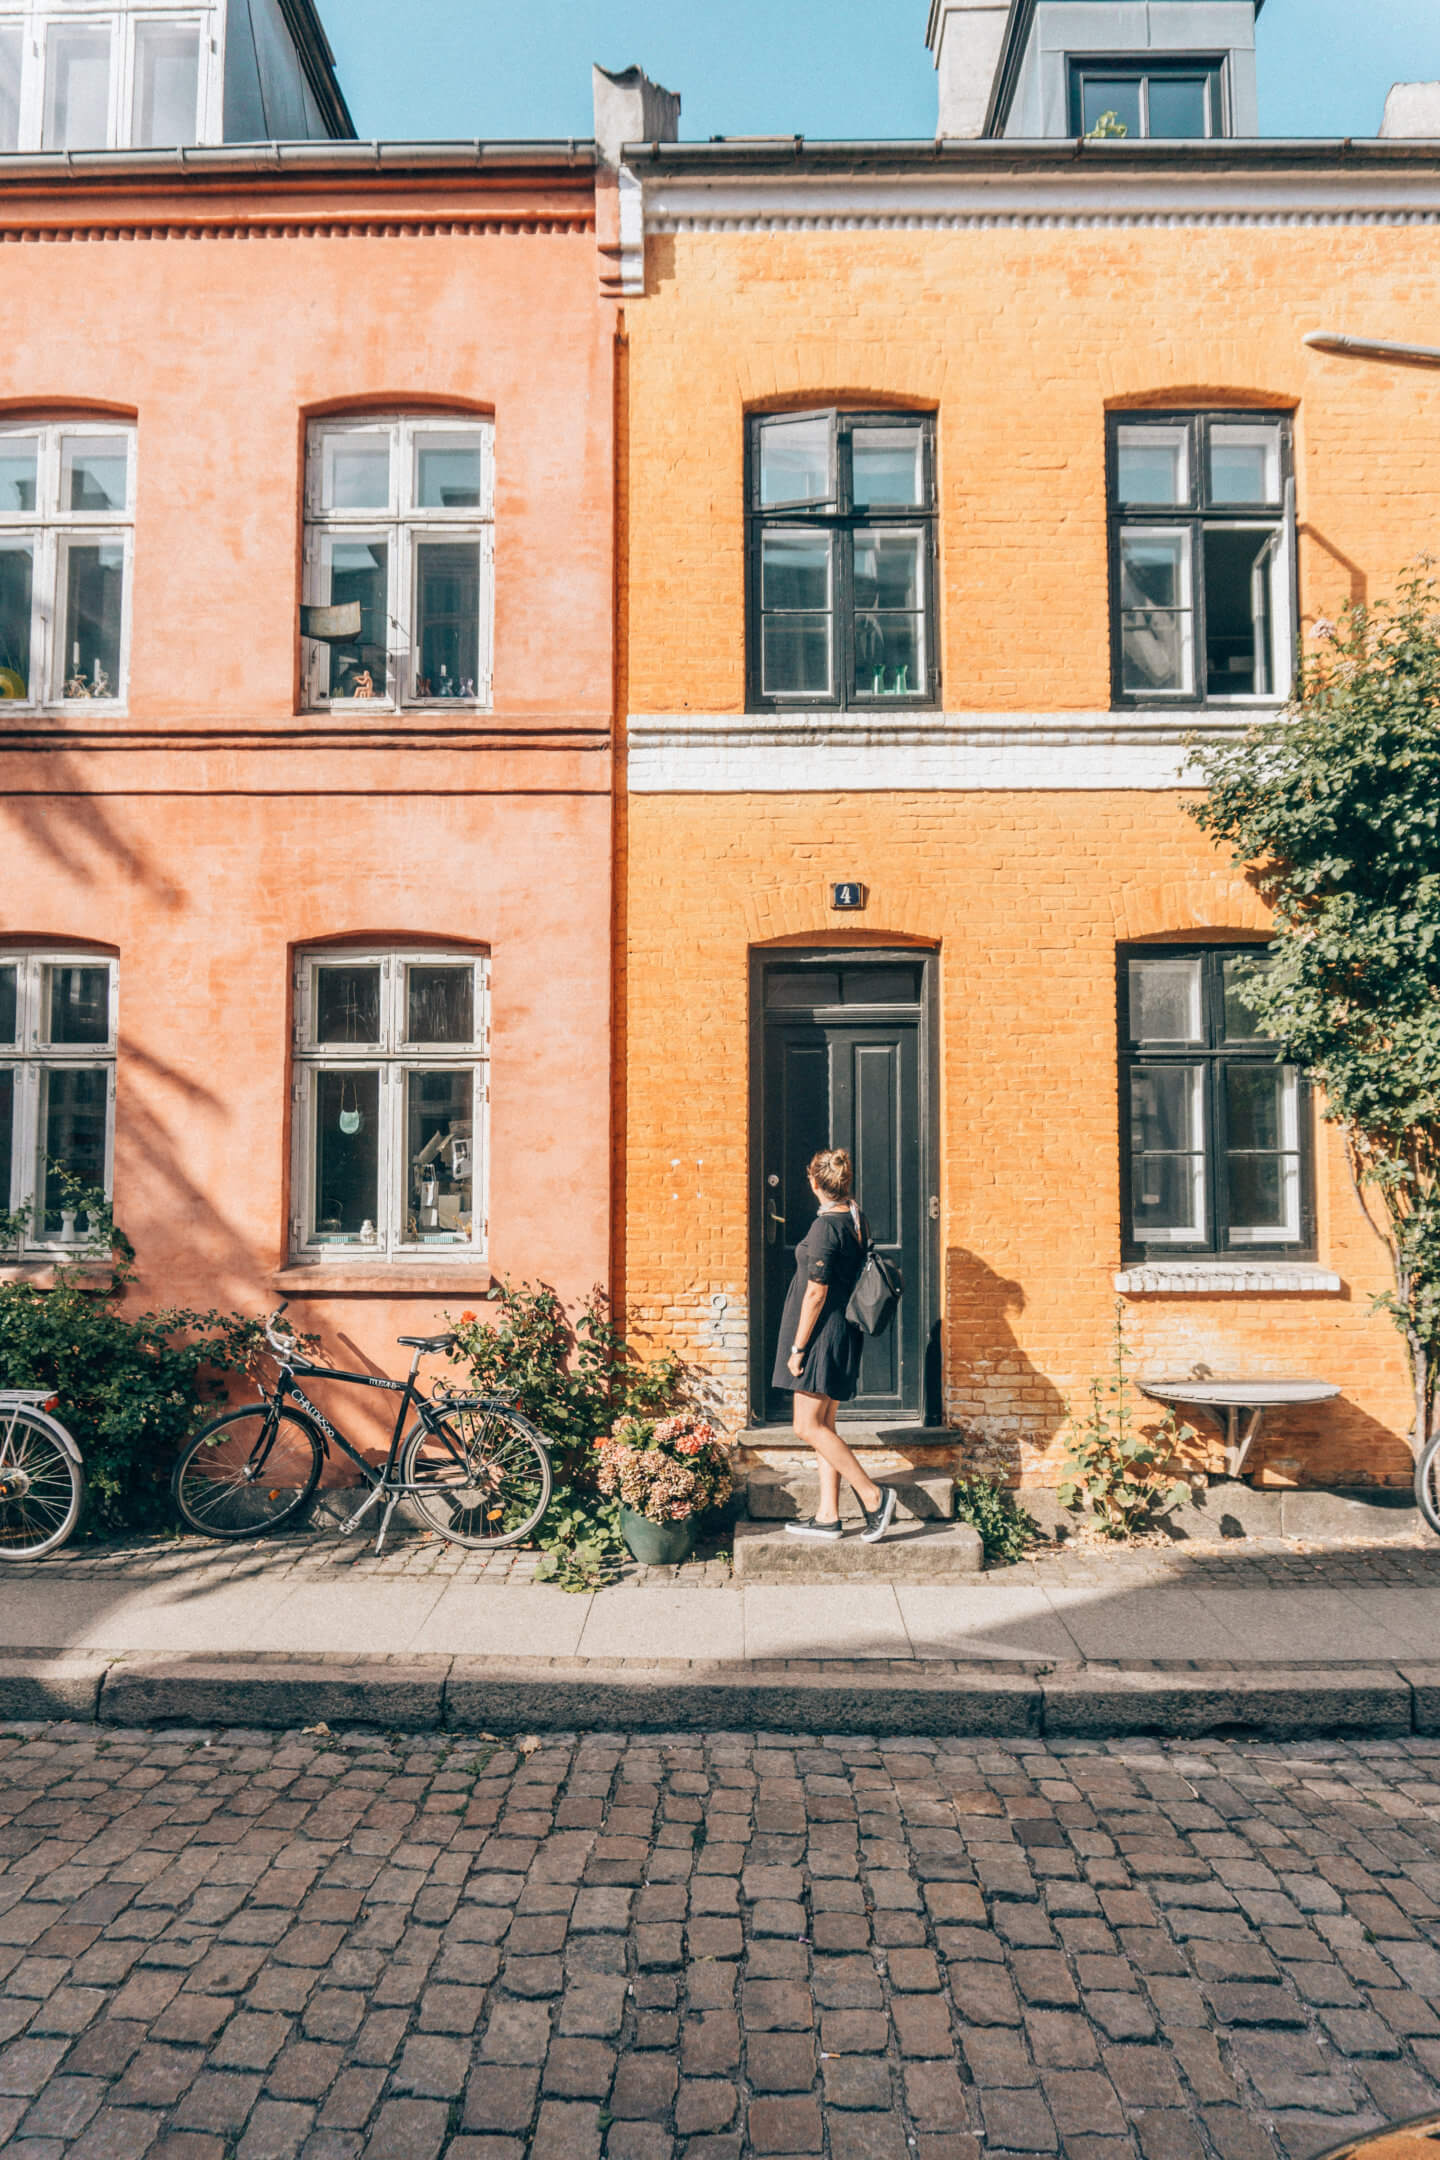 A girl in Copenhagen wanders down a colourful street looking at the traditional apartment buildings in the summer months.